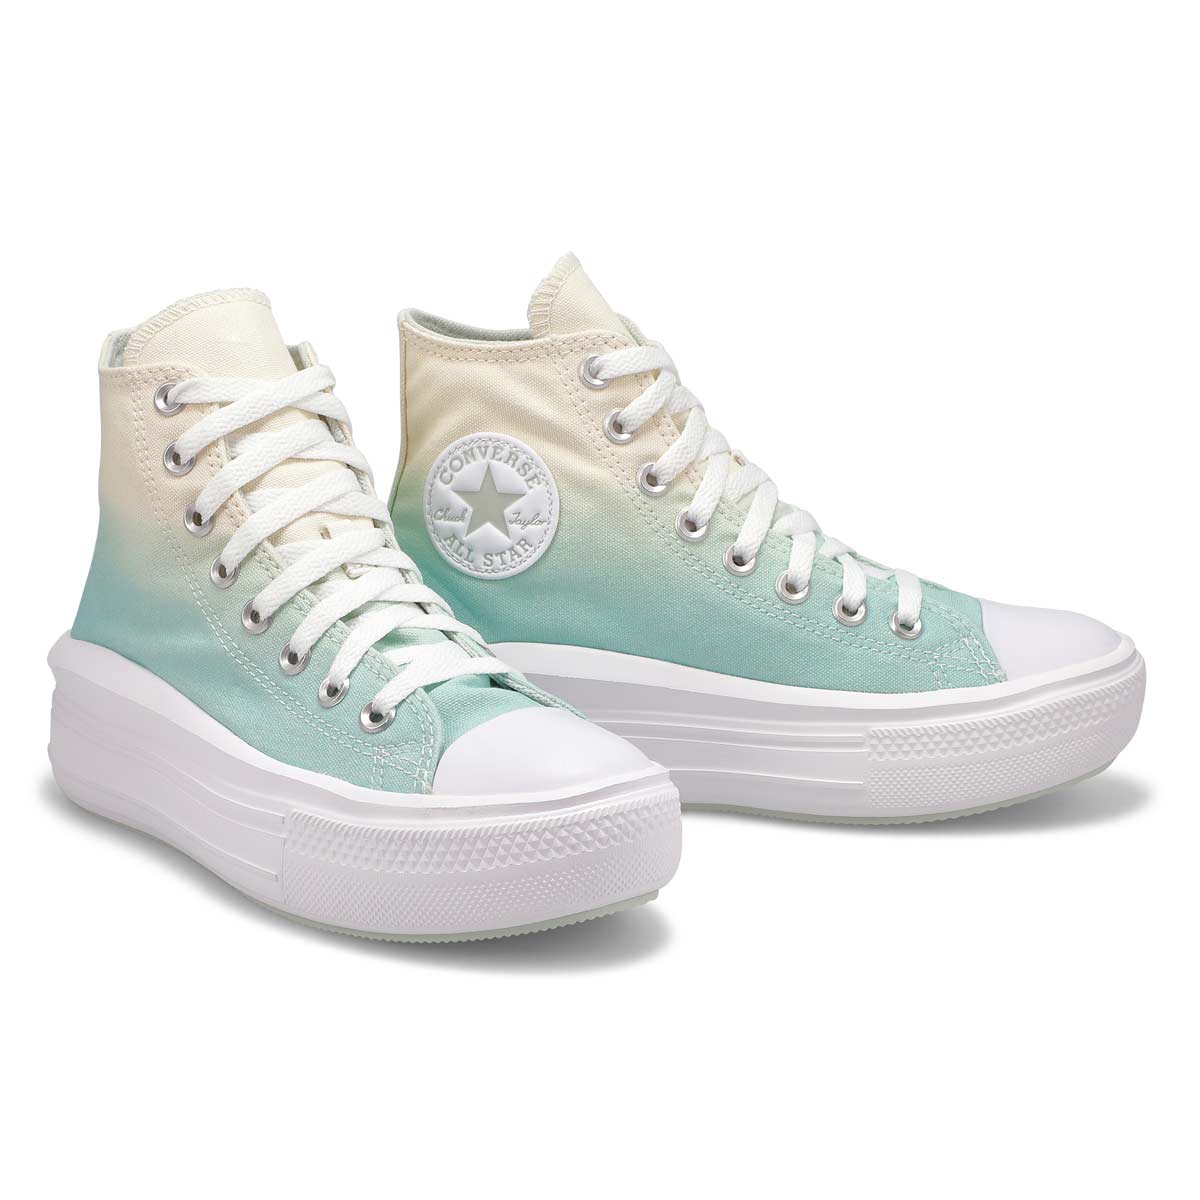 Women's CT All Star Move All Star Mobility Sneaker